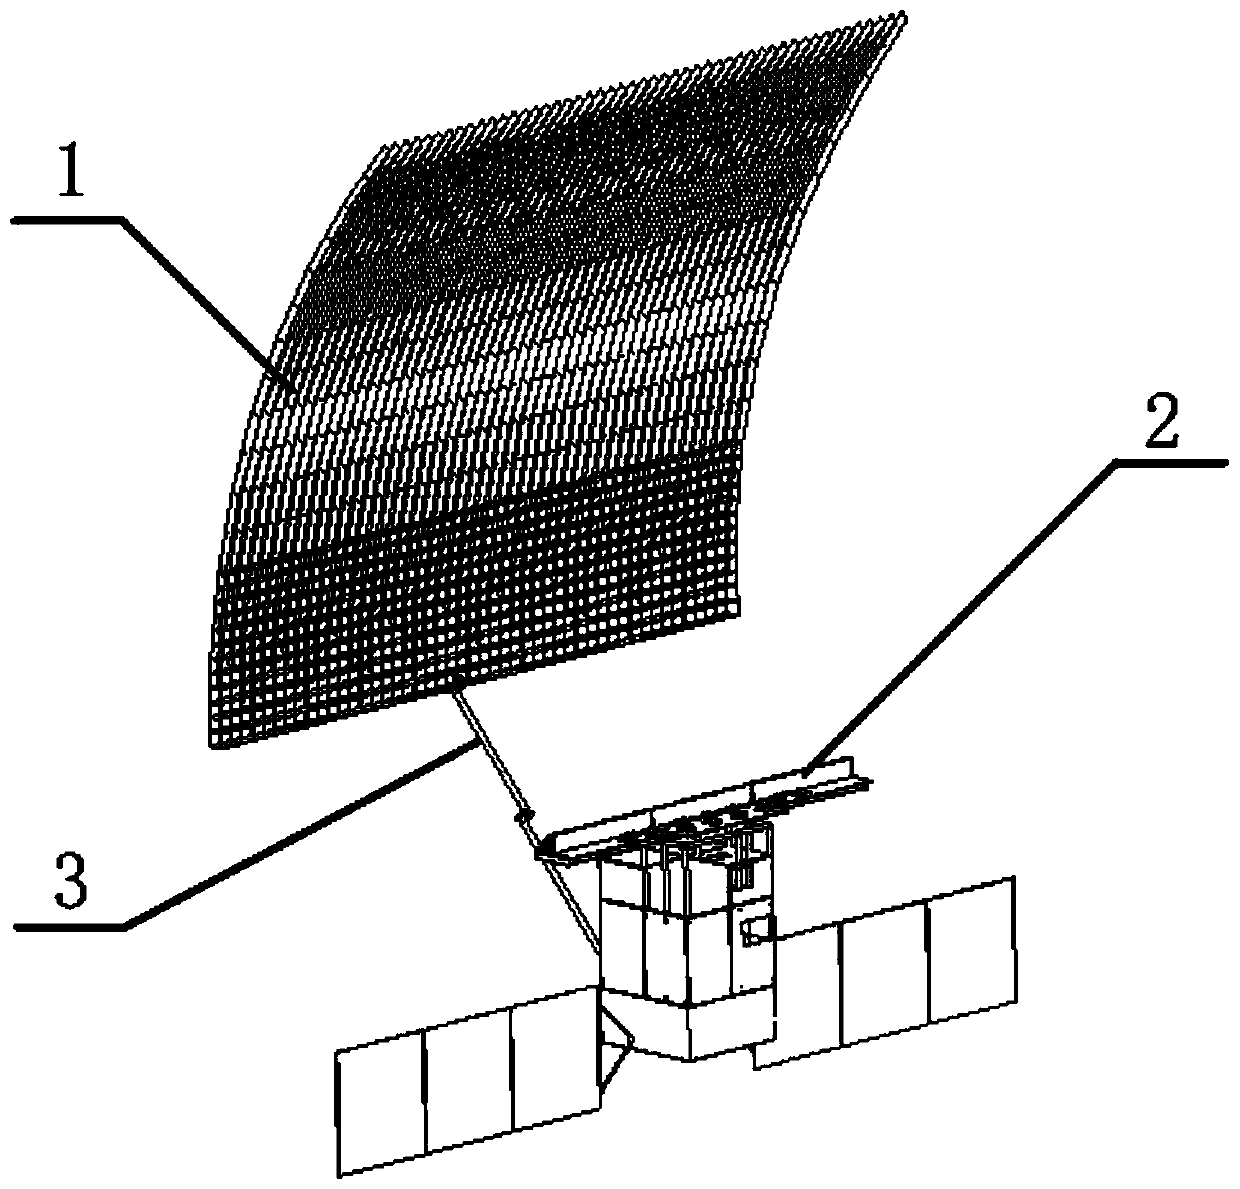 Composite feed source parabolic cylinder antenna and detection satellite